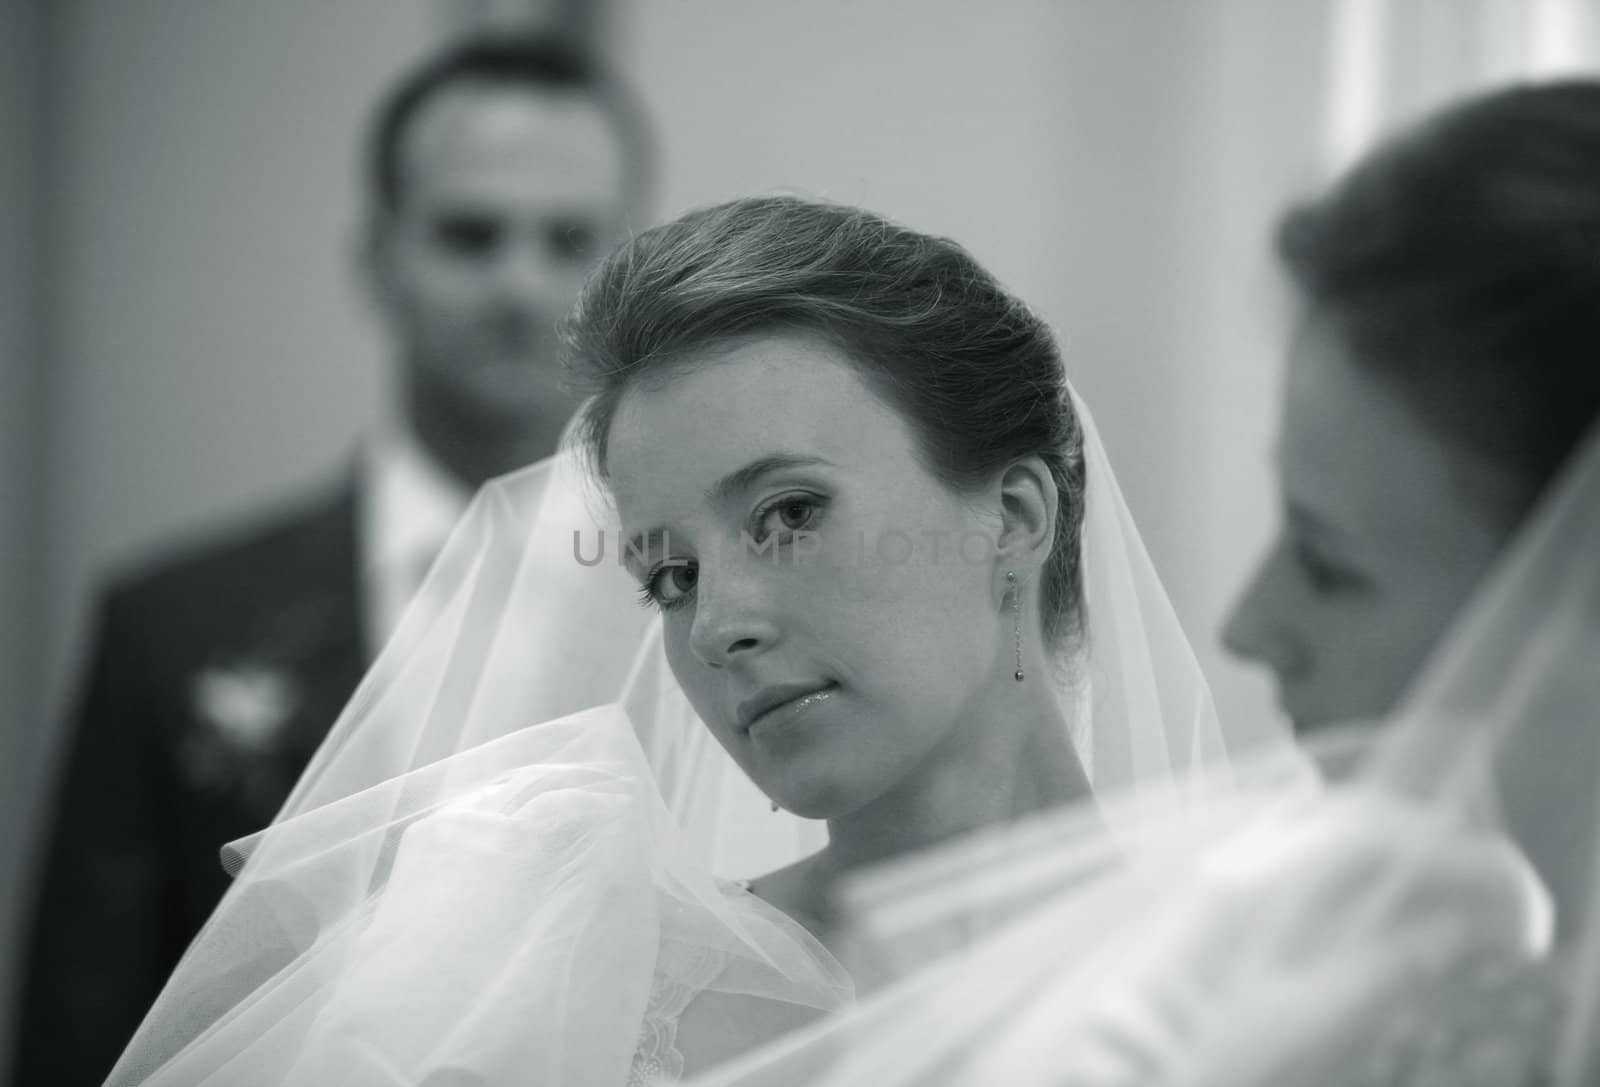 The beautiful young bride and the groom are reflected in a mirror